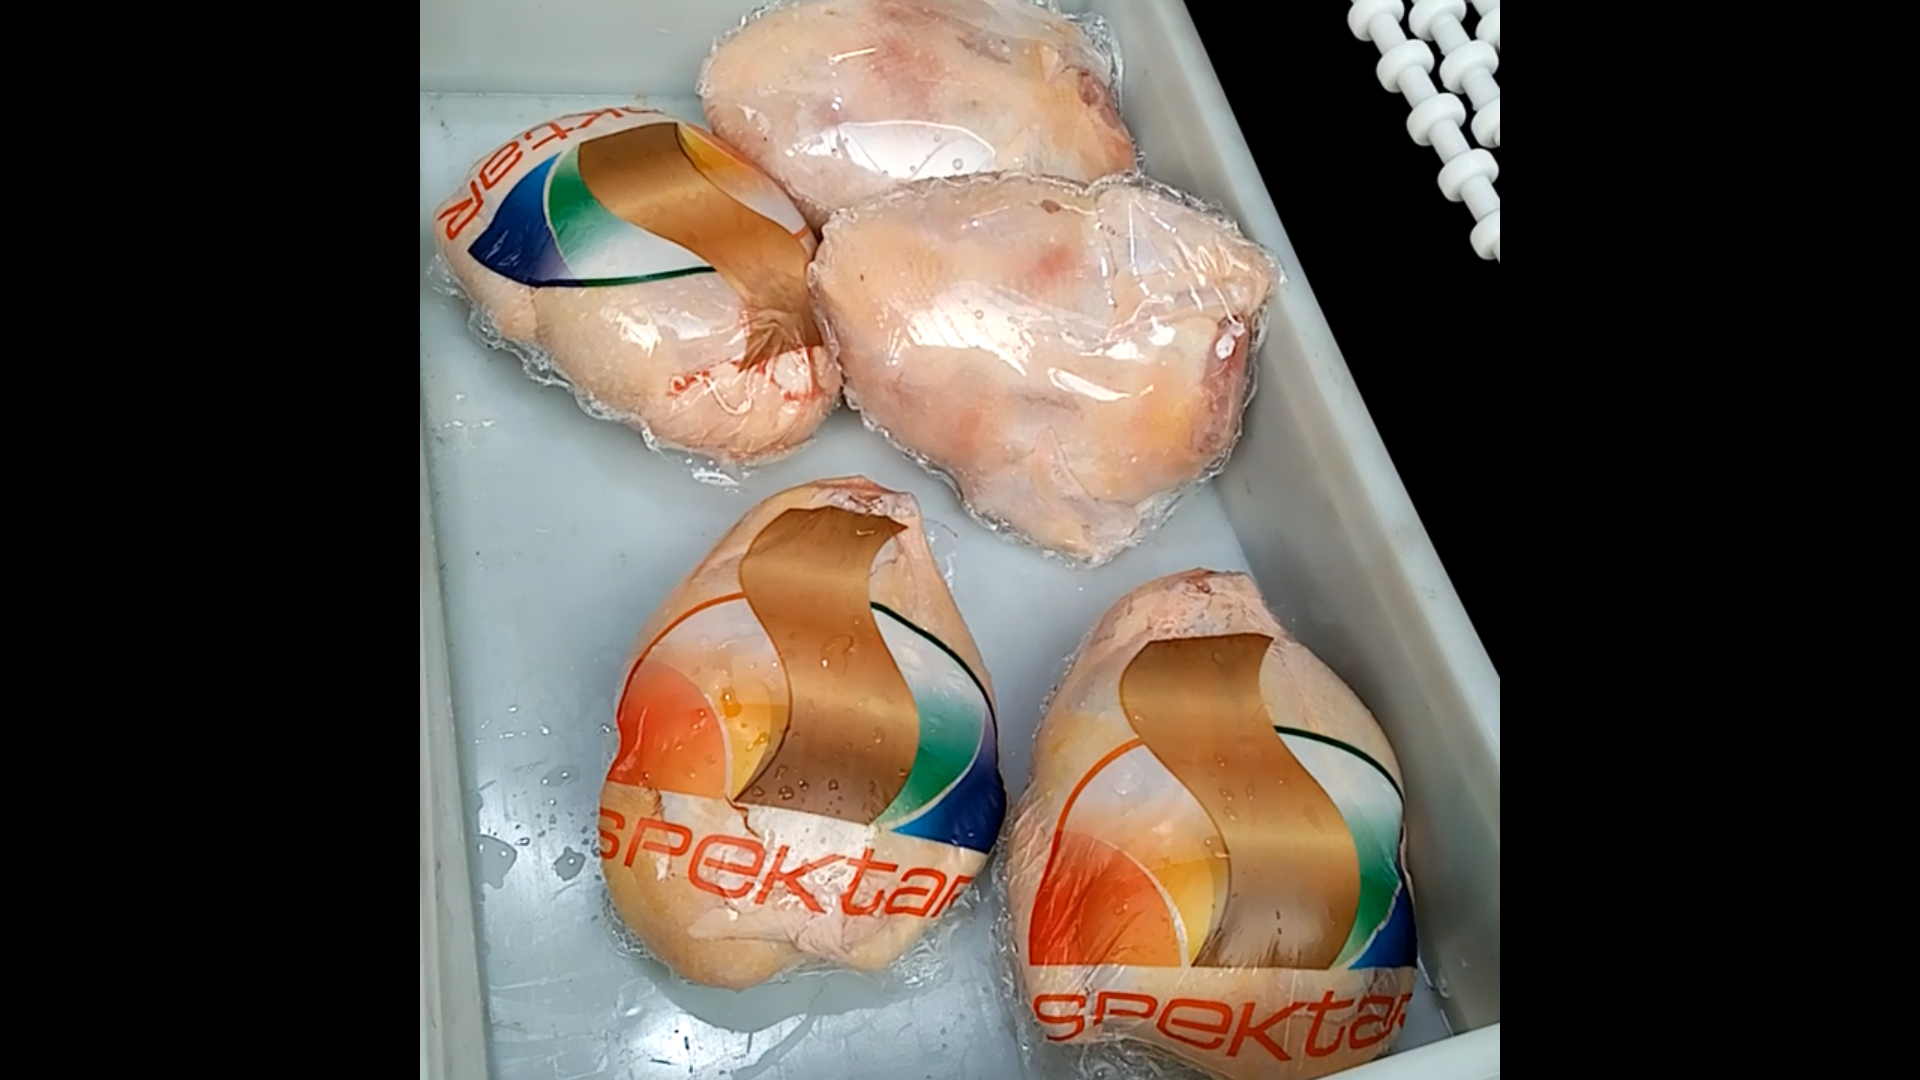 Whole chicken packed in shrink films